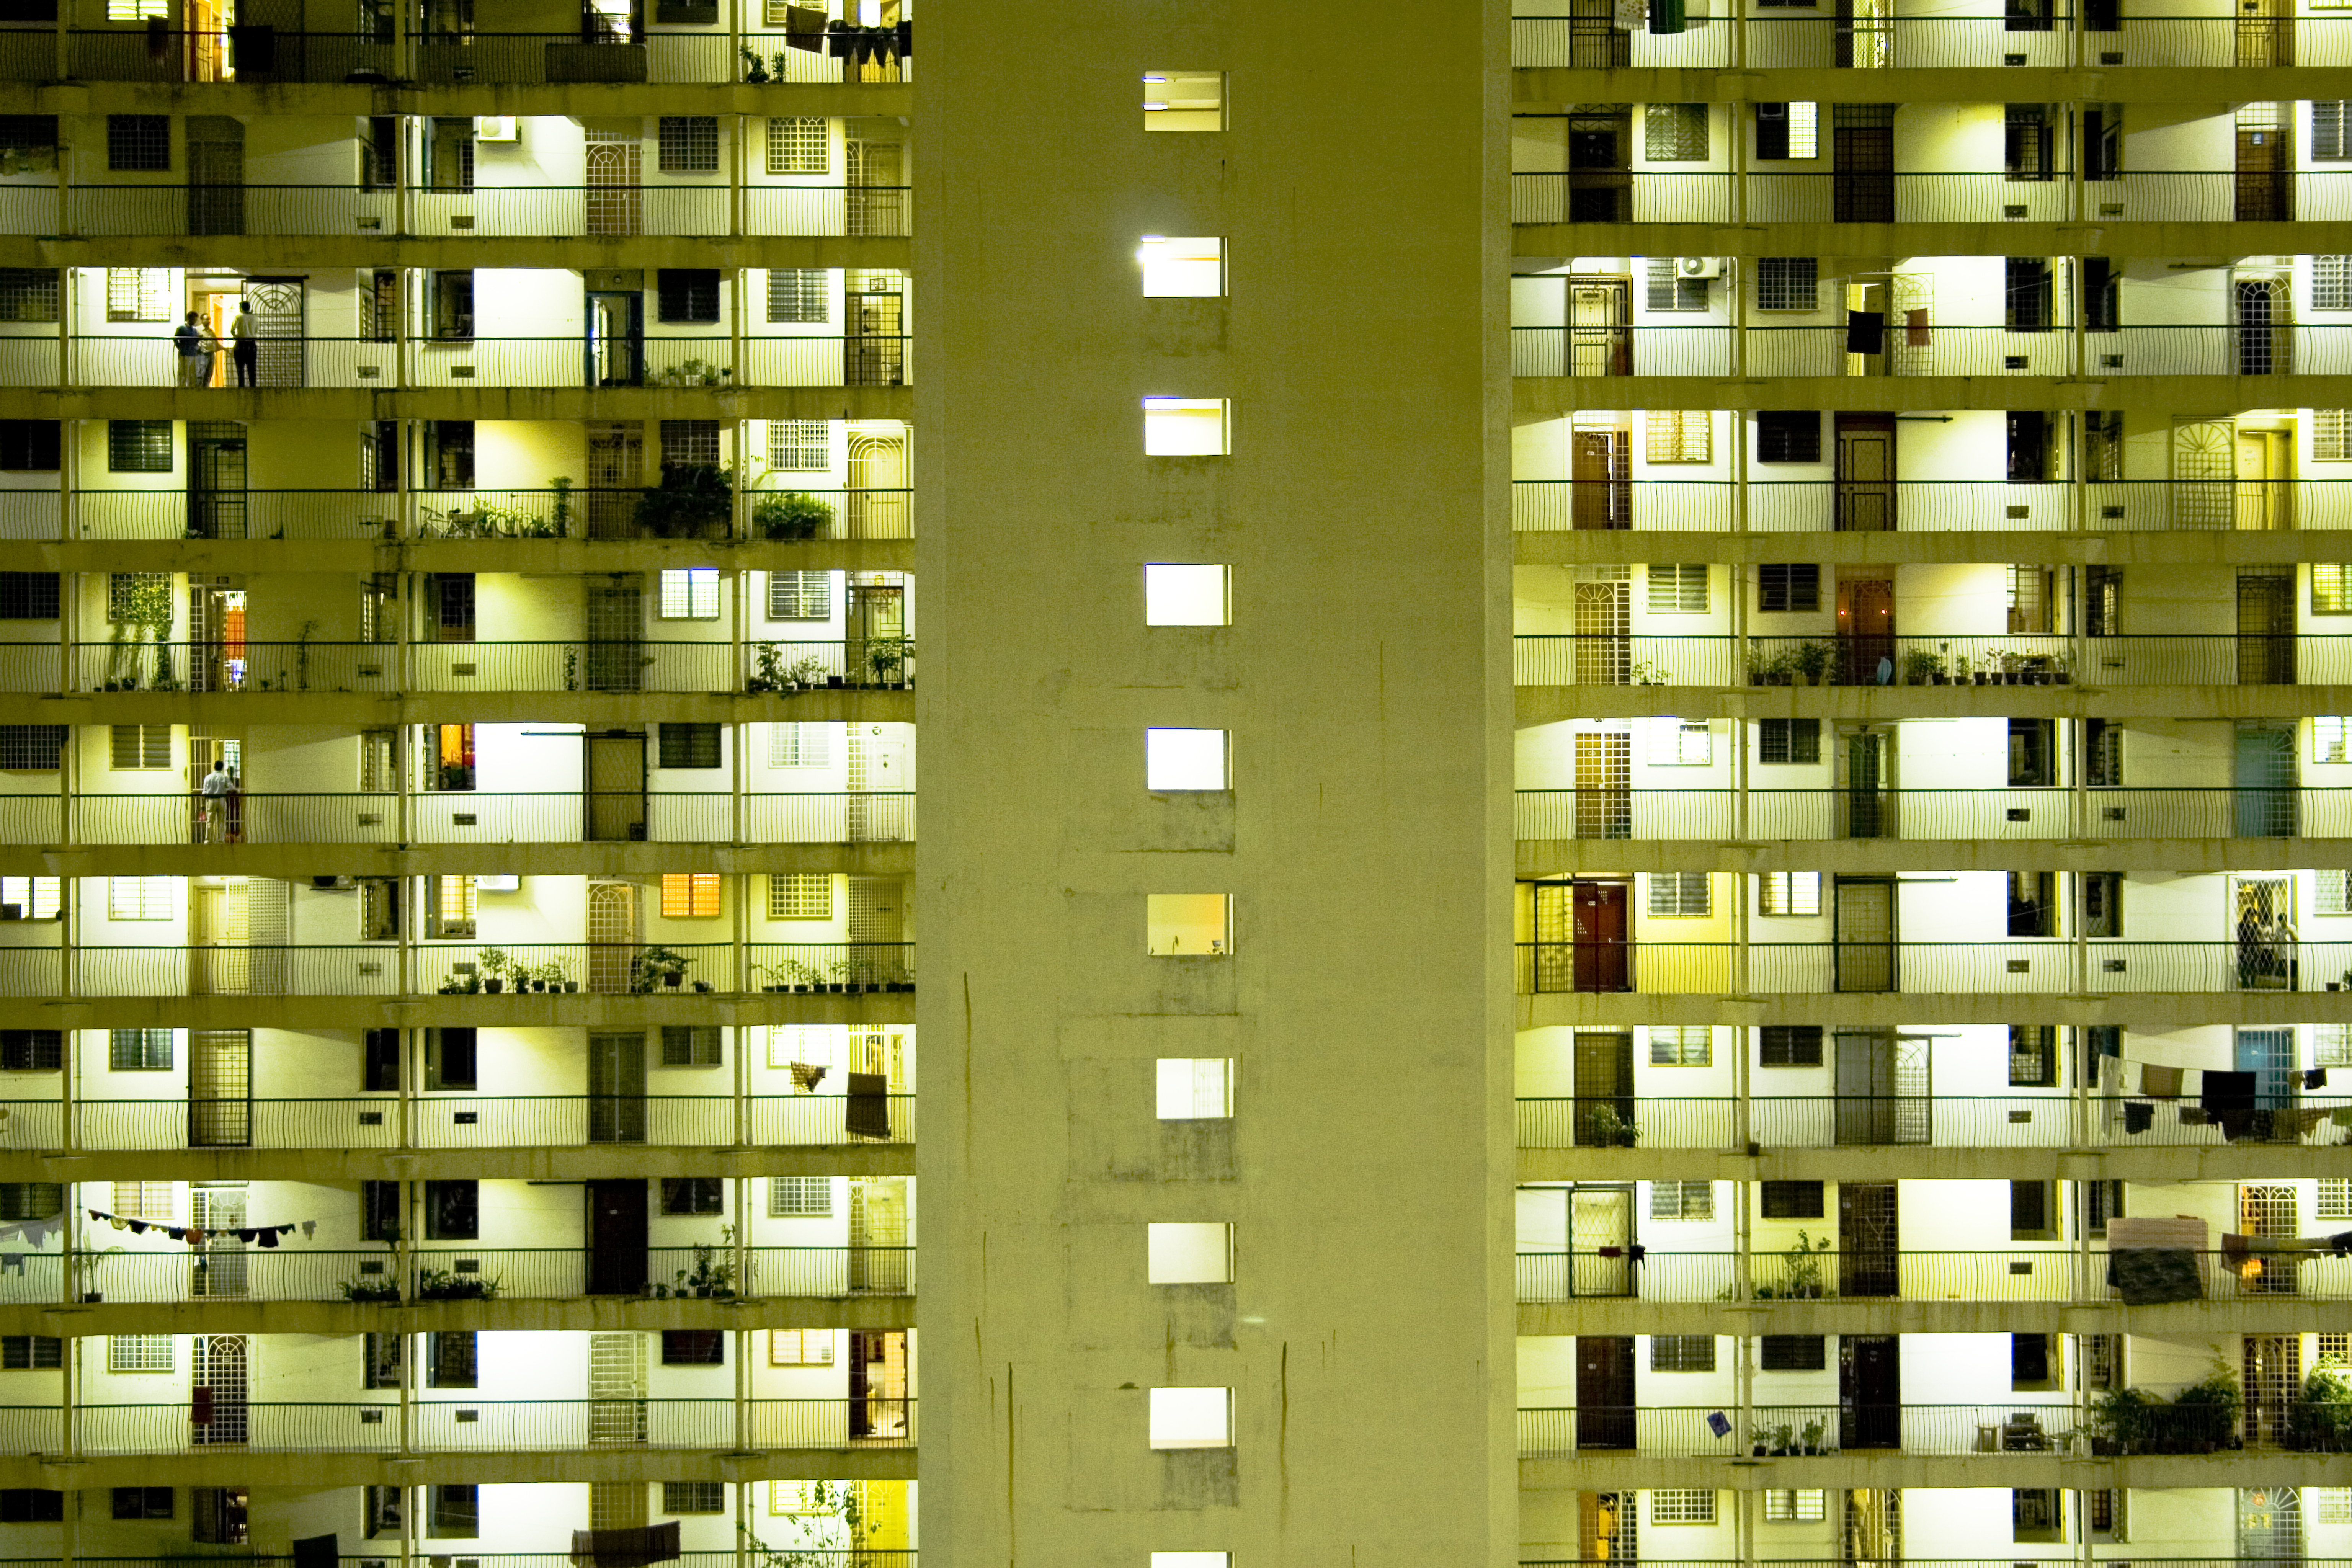 View of large apartment building exterior lit up at night